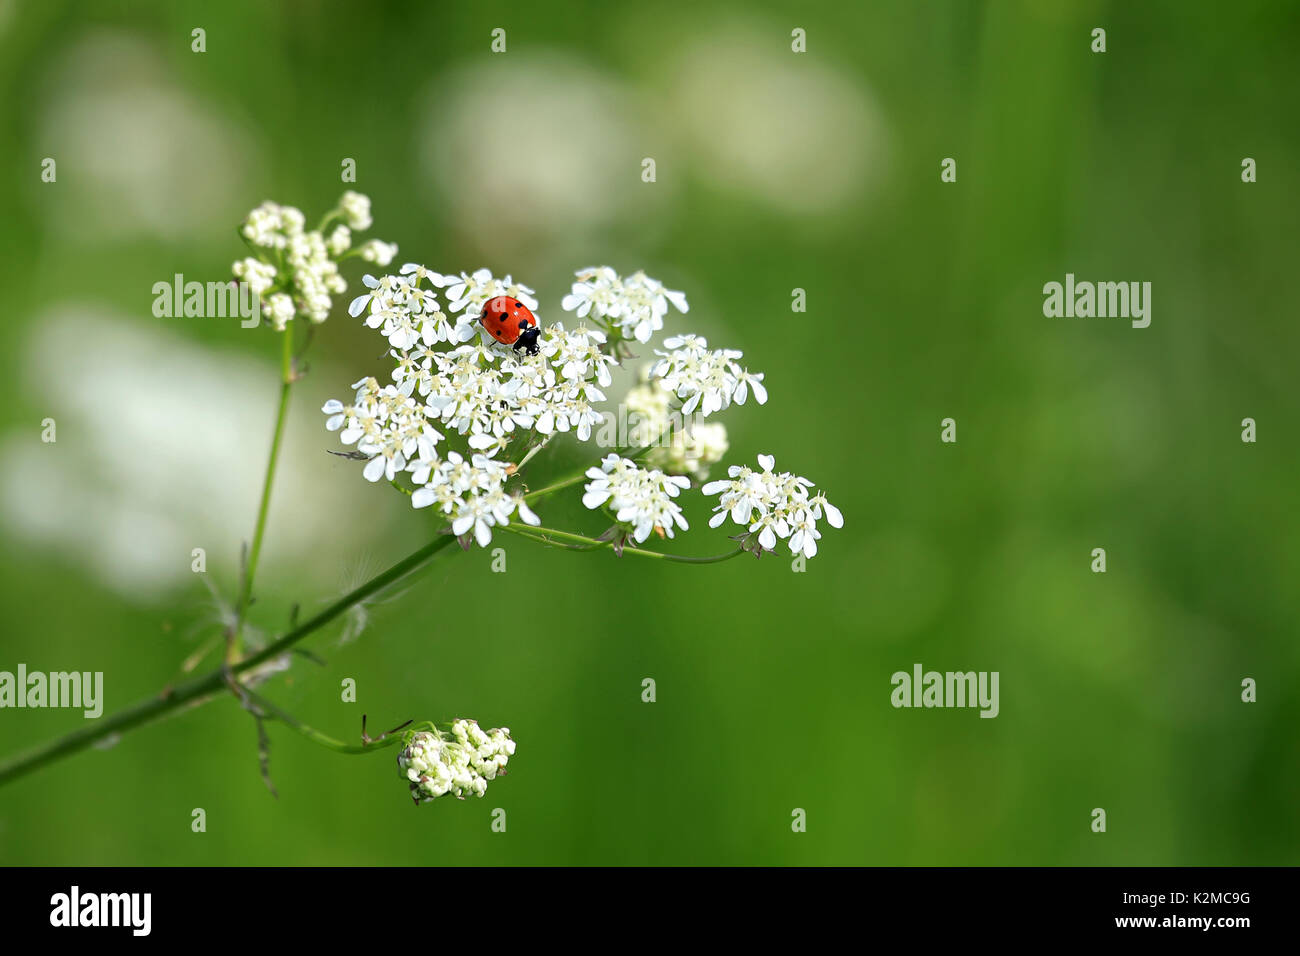 Seven Spotted Ladybug, Coccinella septempunctata, on white flowers of Cow Parsley, Anthriscus sylvestris, with green background of grass at summer. Sh Stock Photo